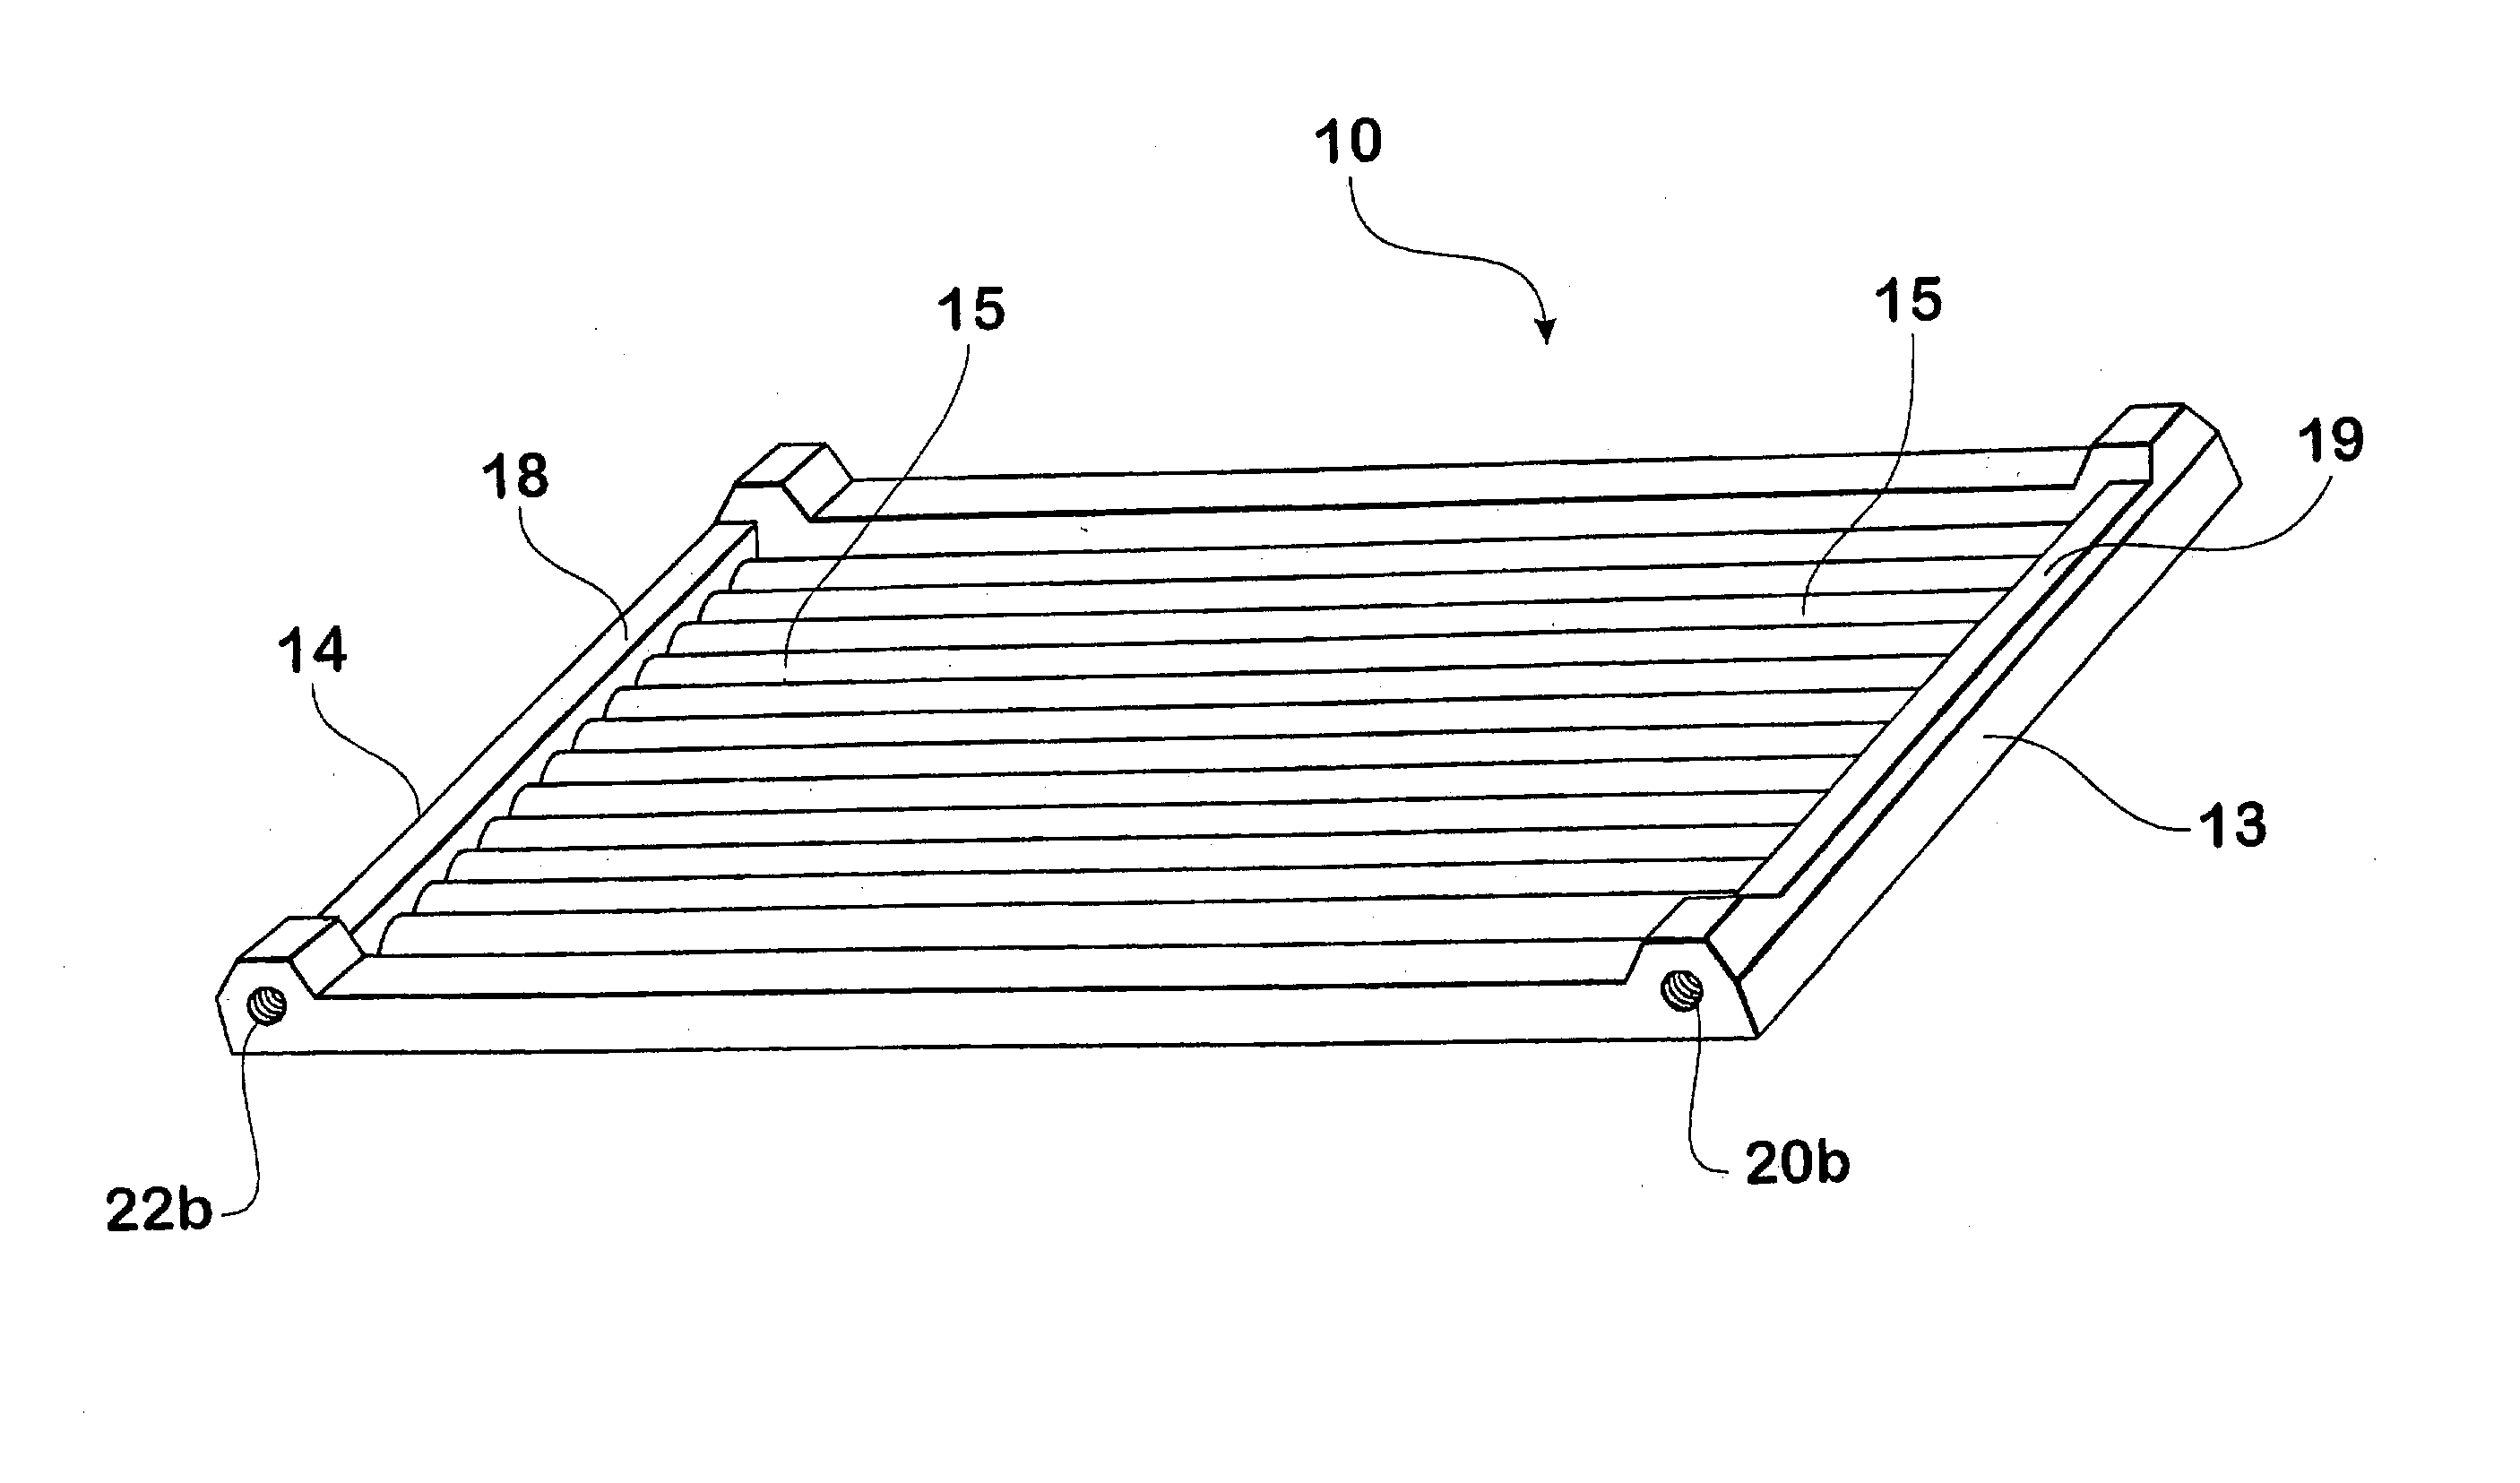 Method of manufacturing a solar collector panel